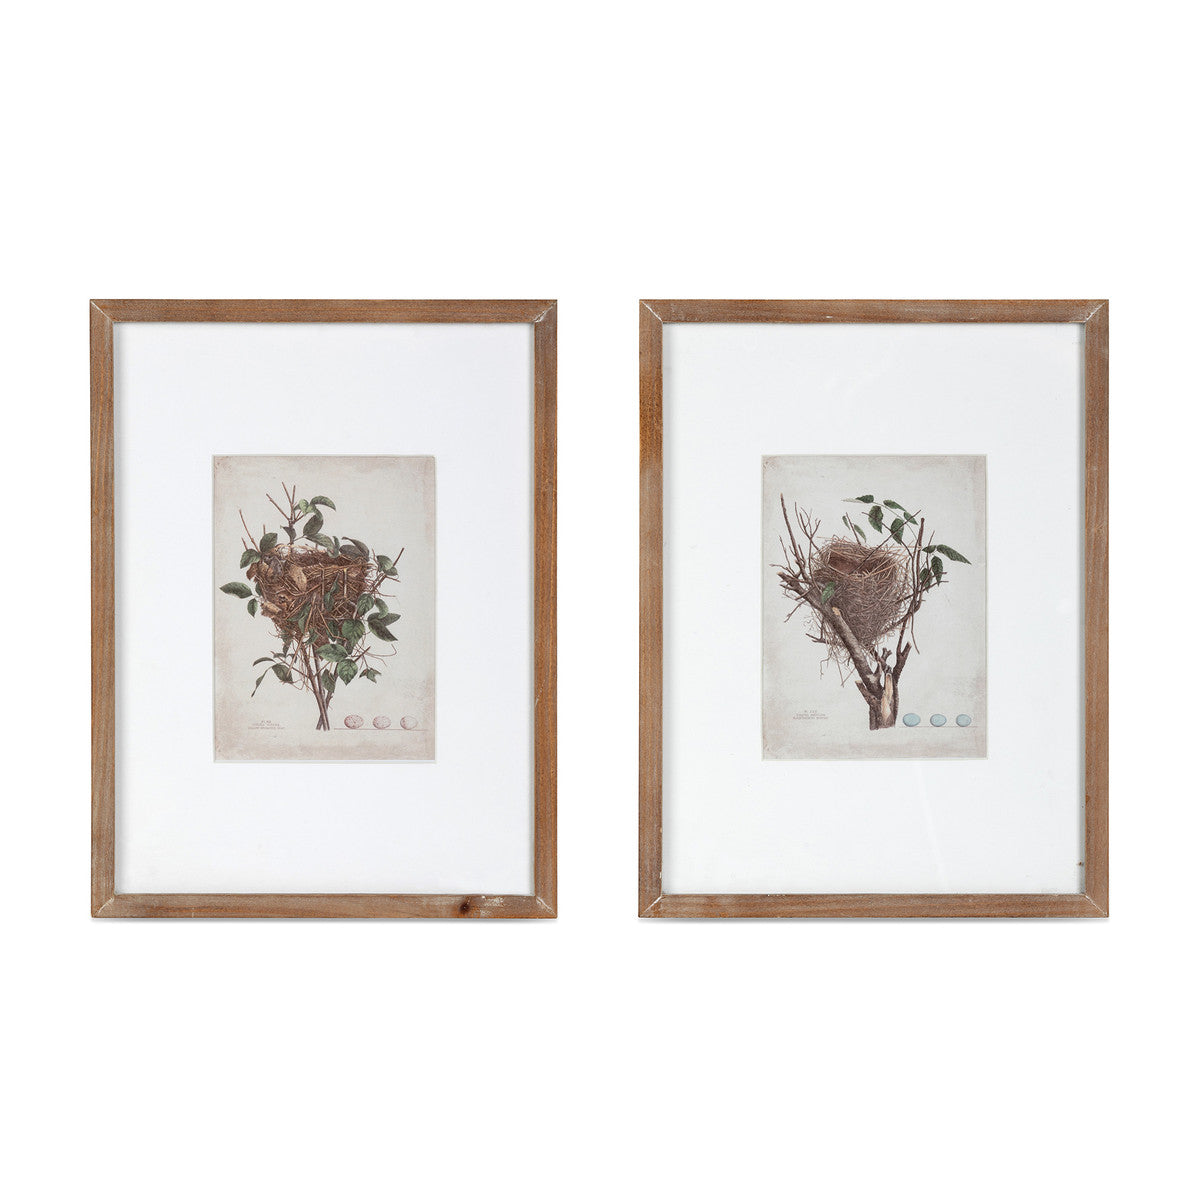 Feathered Nest Framed Print - 2 Assorted Styles